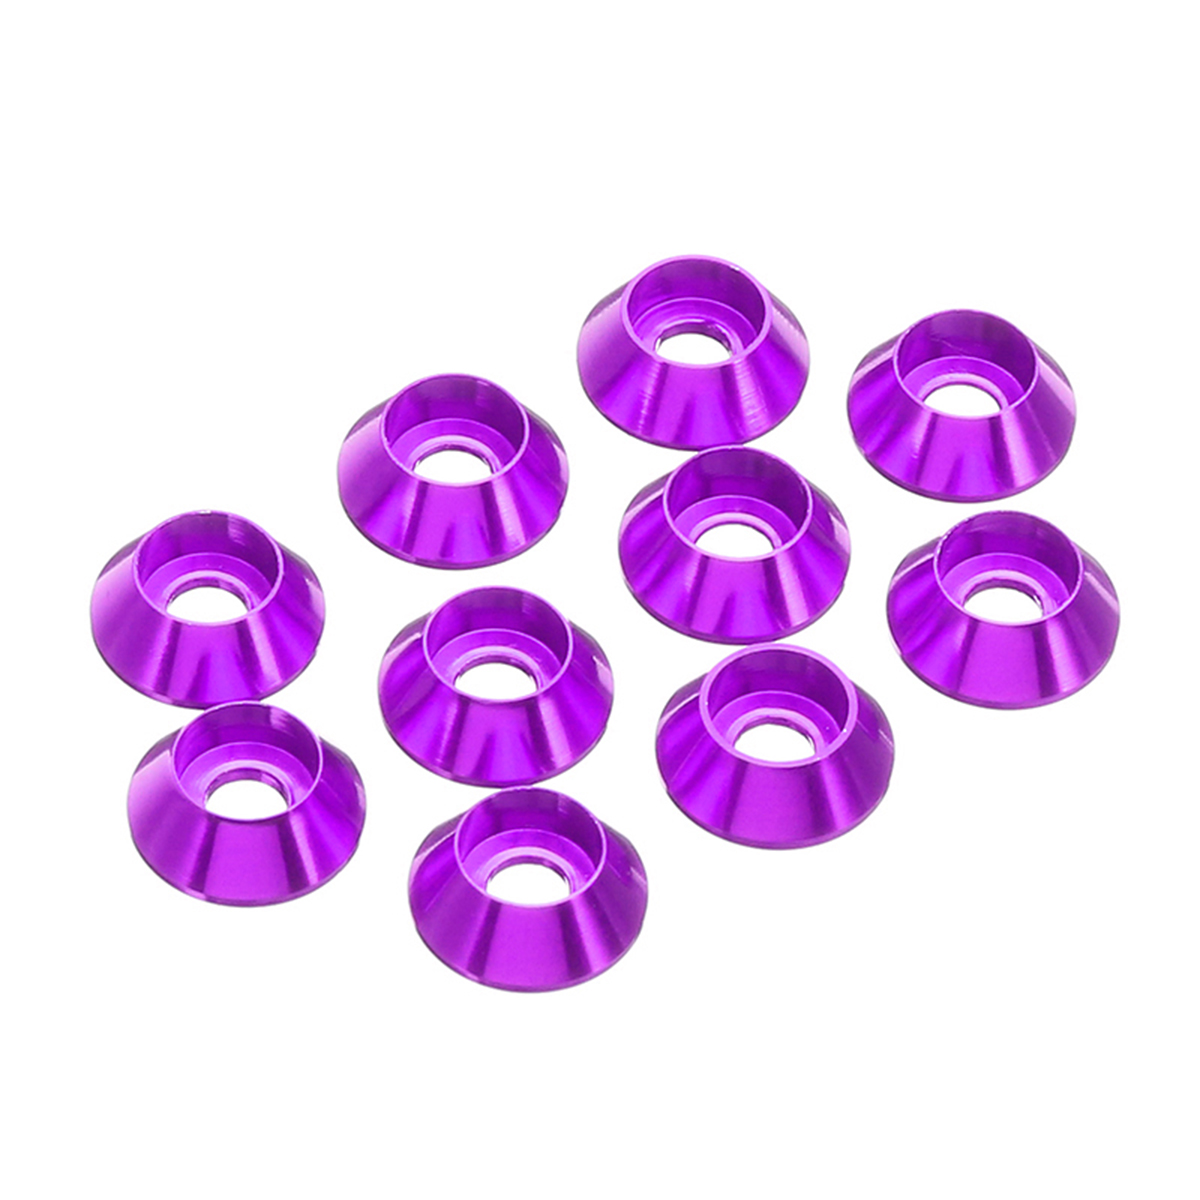 Sulevetrade-M5AN2-10Pcs-M5-Cup-Head-Hex-Screw-Gasket-Washer-Nuts-Aluminum-Alloy-Multicolor-1535744-8